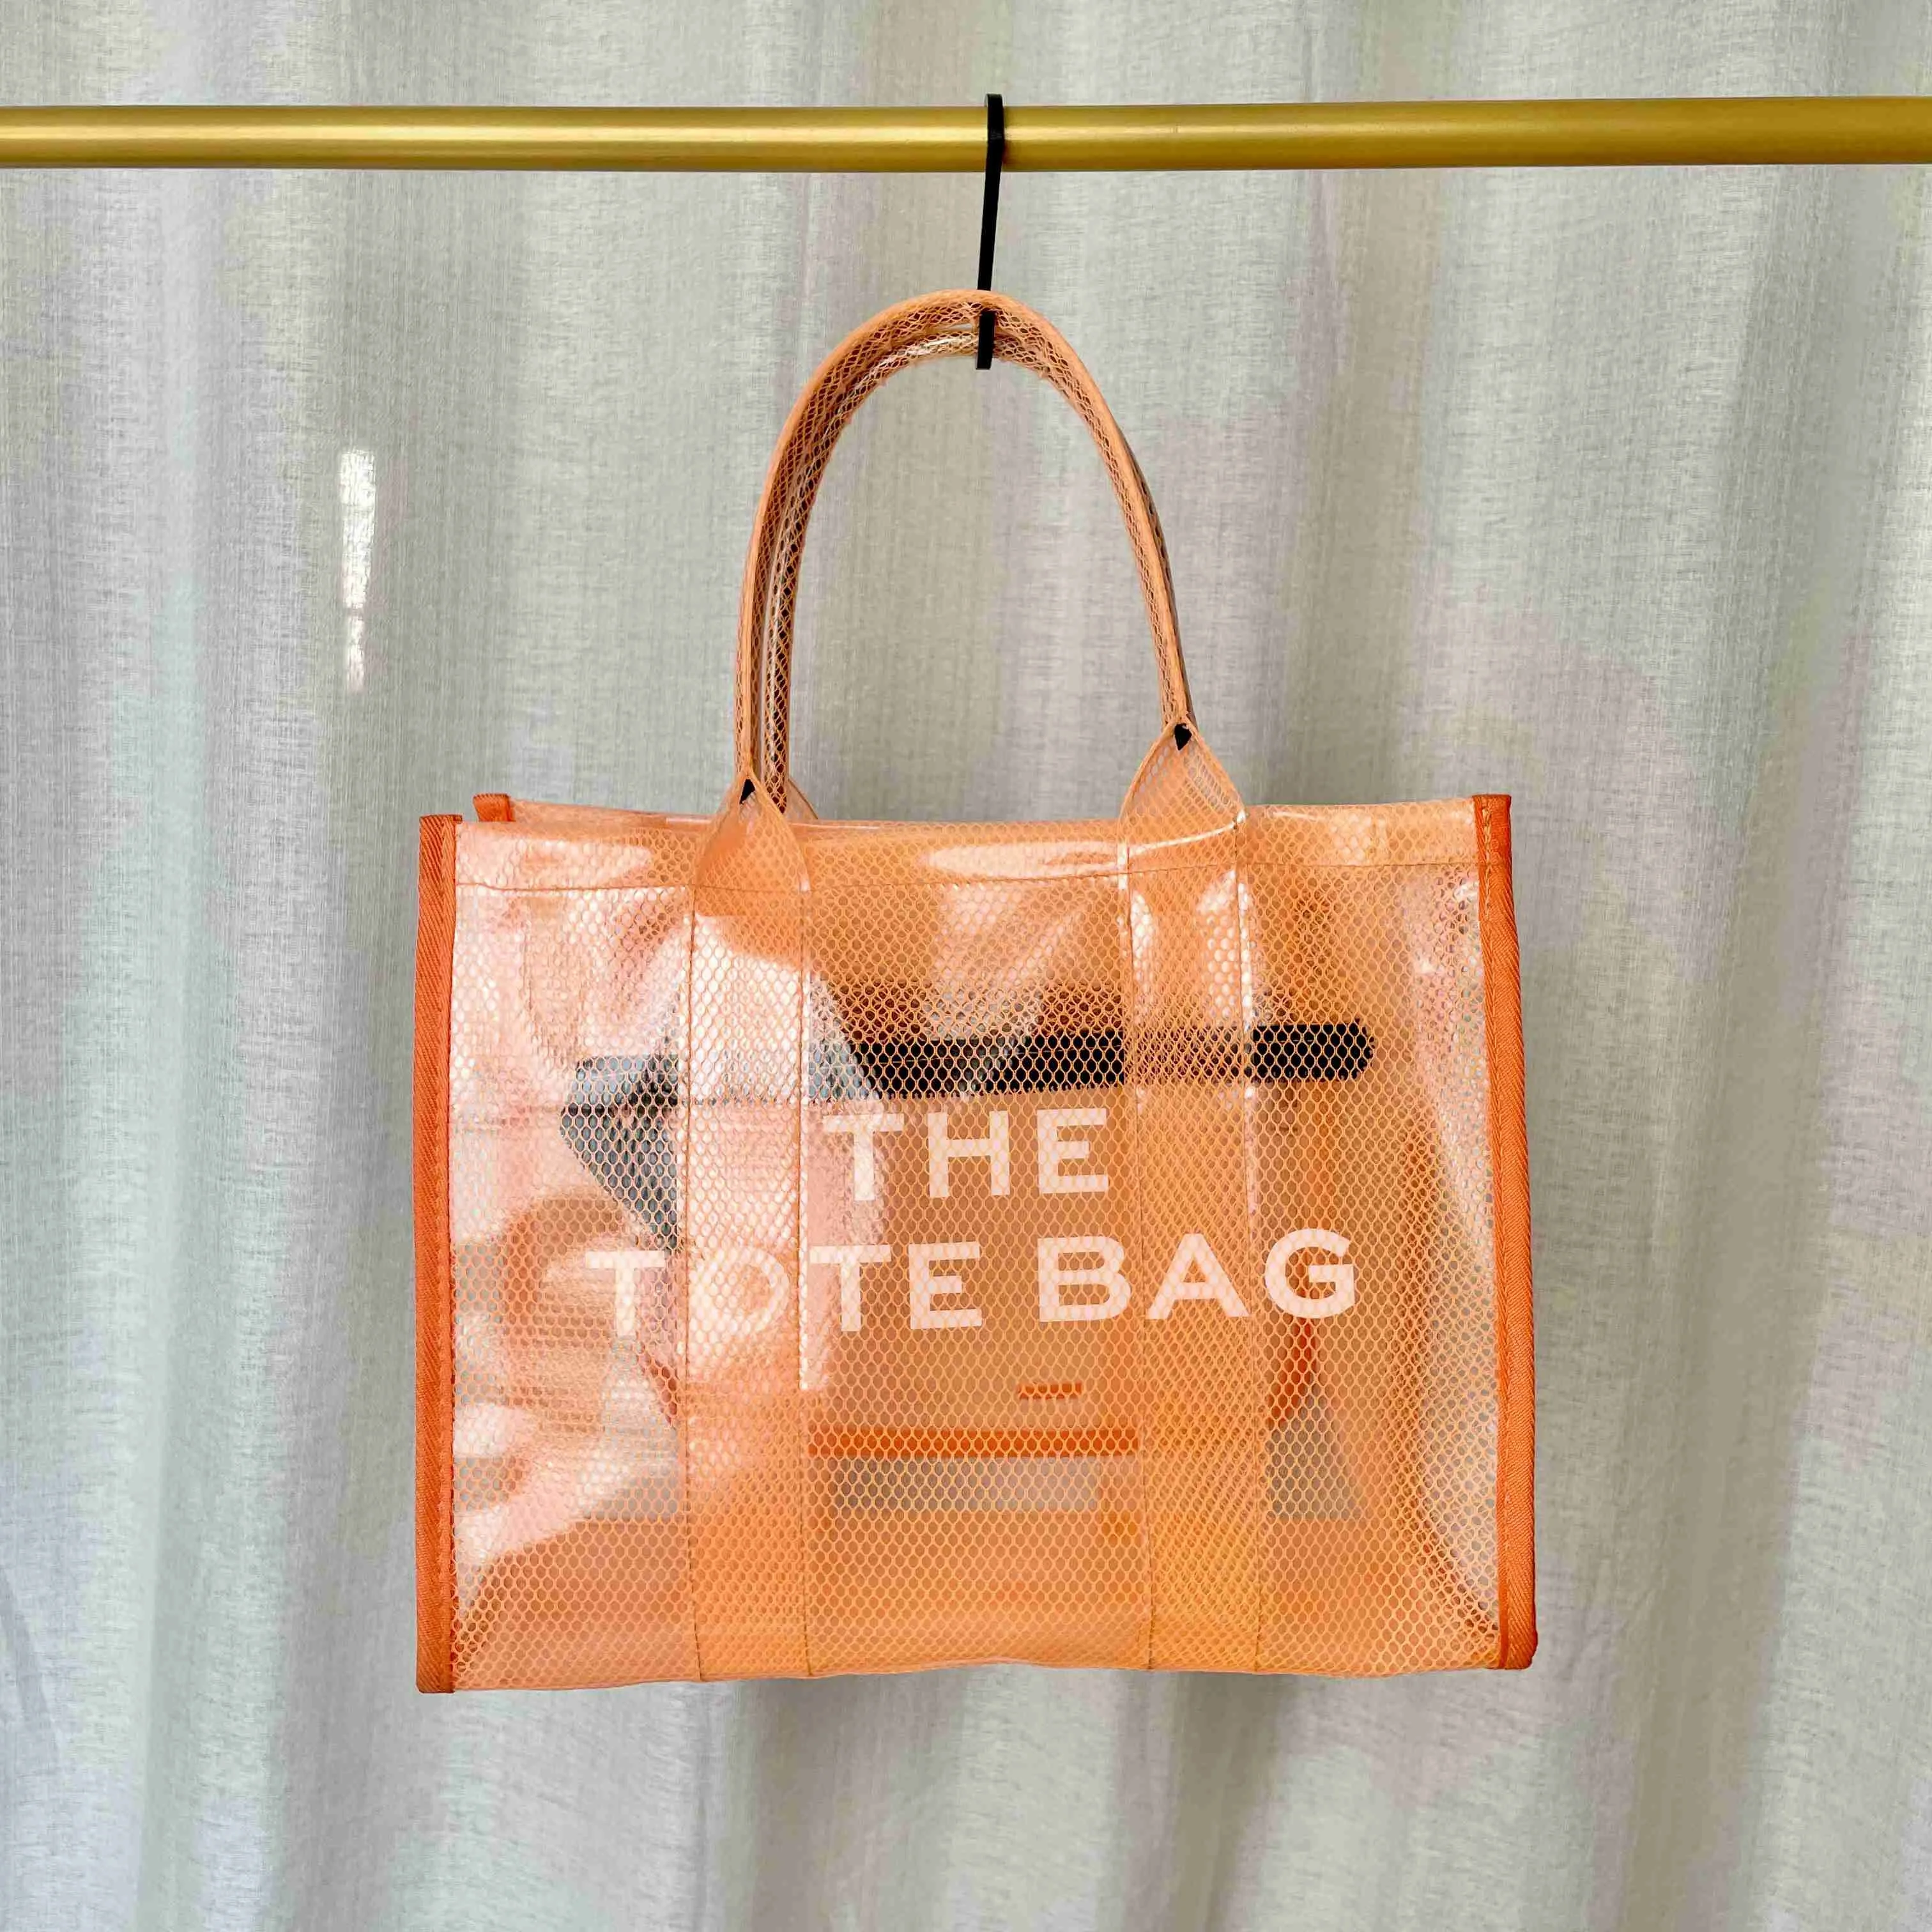 

2022 Fashion Summer Translucent Clear PVC WomenTote Bags Purses and Handbags Women Hand Bags Ladies